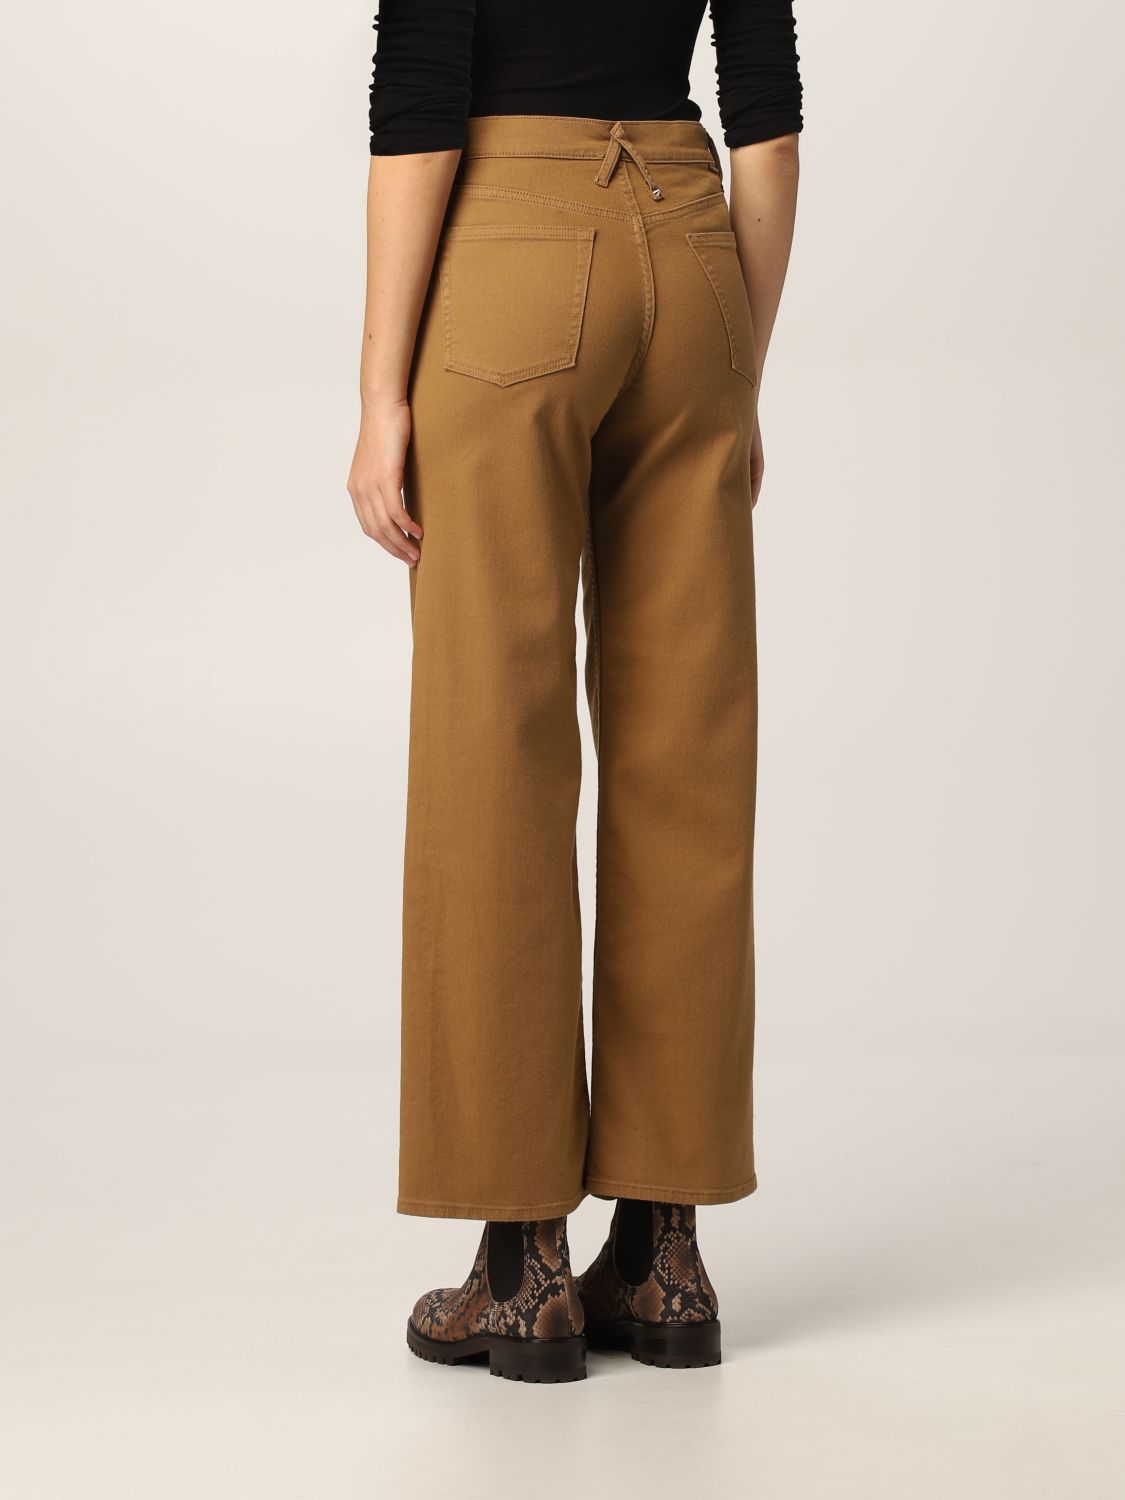 Jeans Cycle: Pants women Cycle camel 2